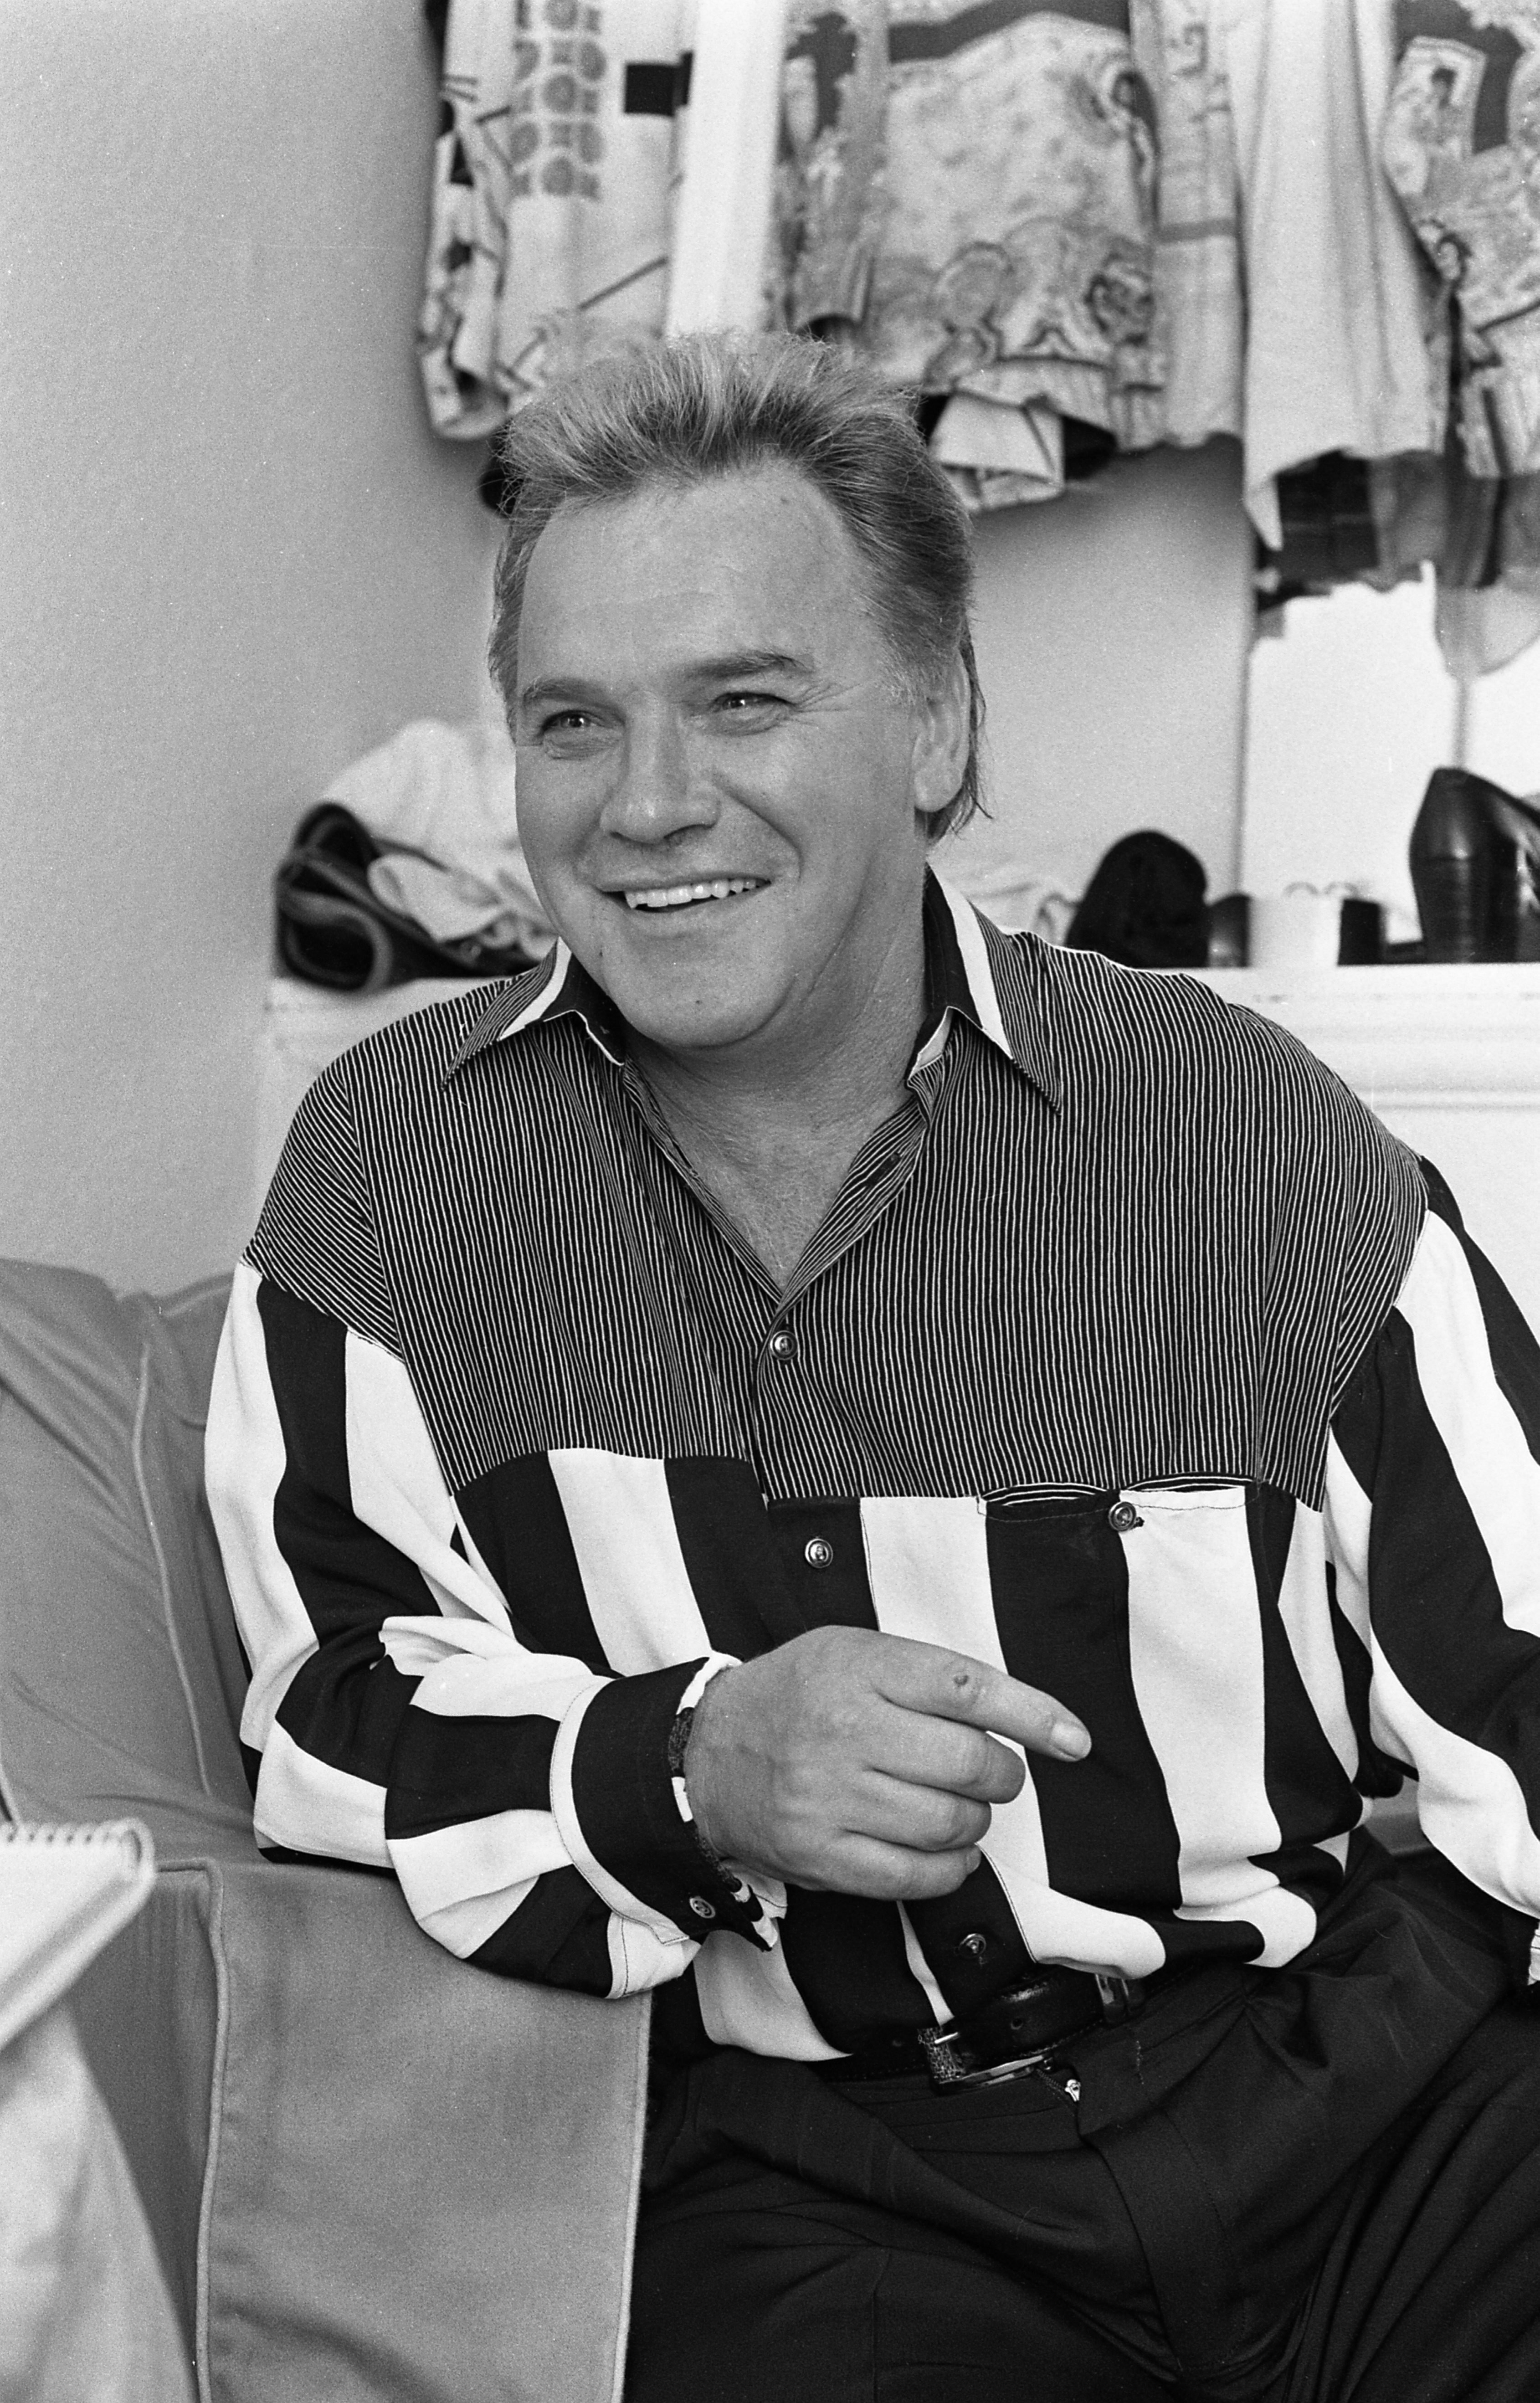 Freddie Starr in his dressing room at the Olympia Theatre in Dublin, Ireland, in 1993 | Photo: Getty Images